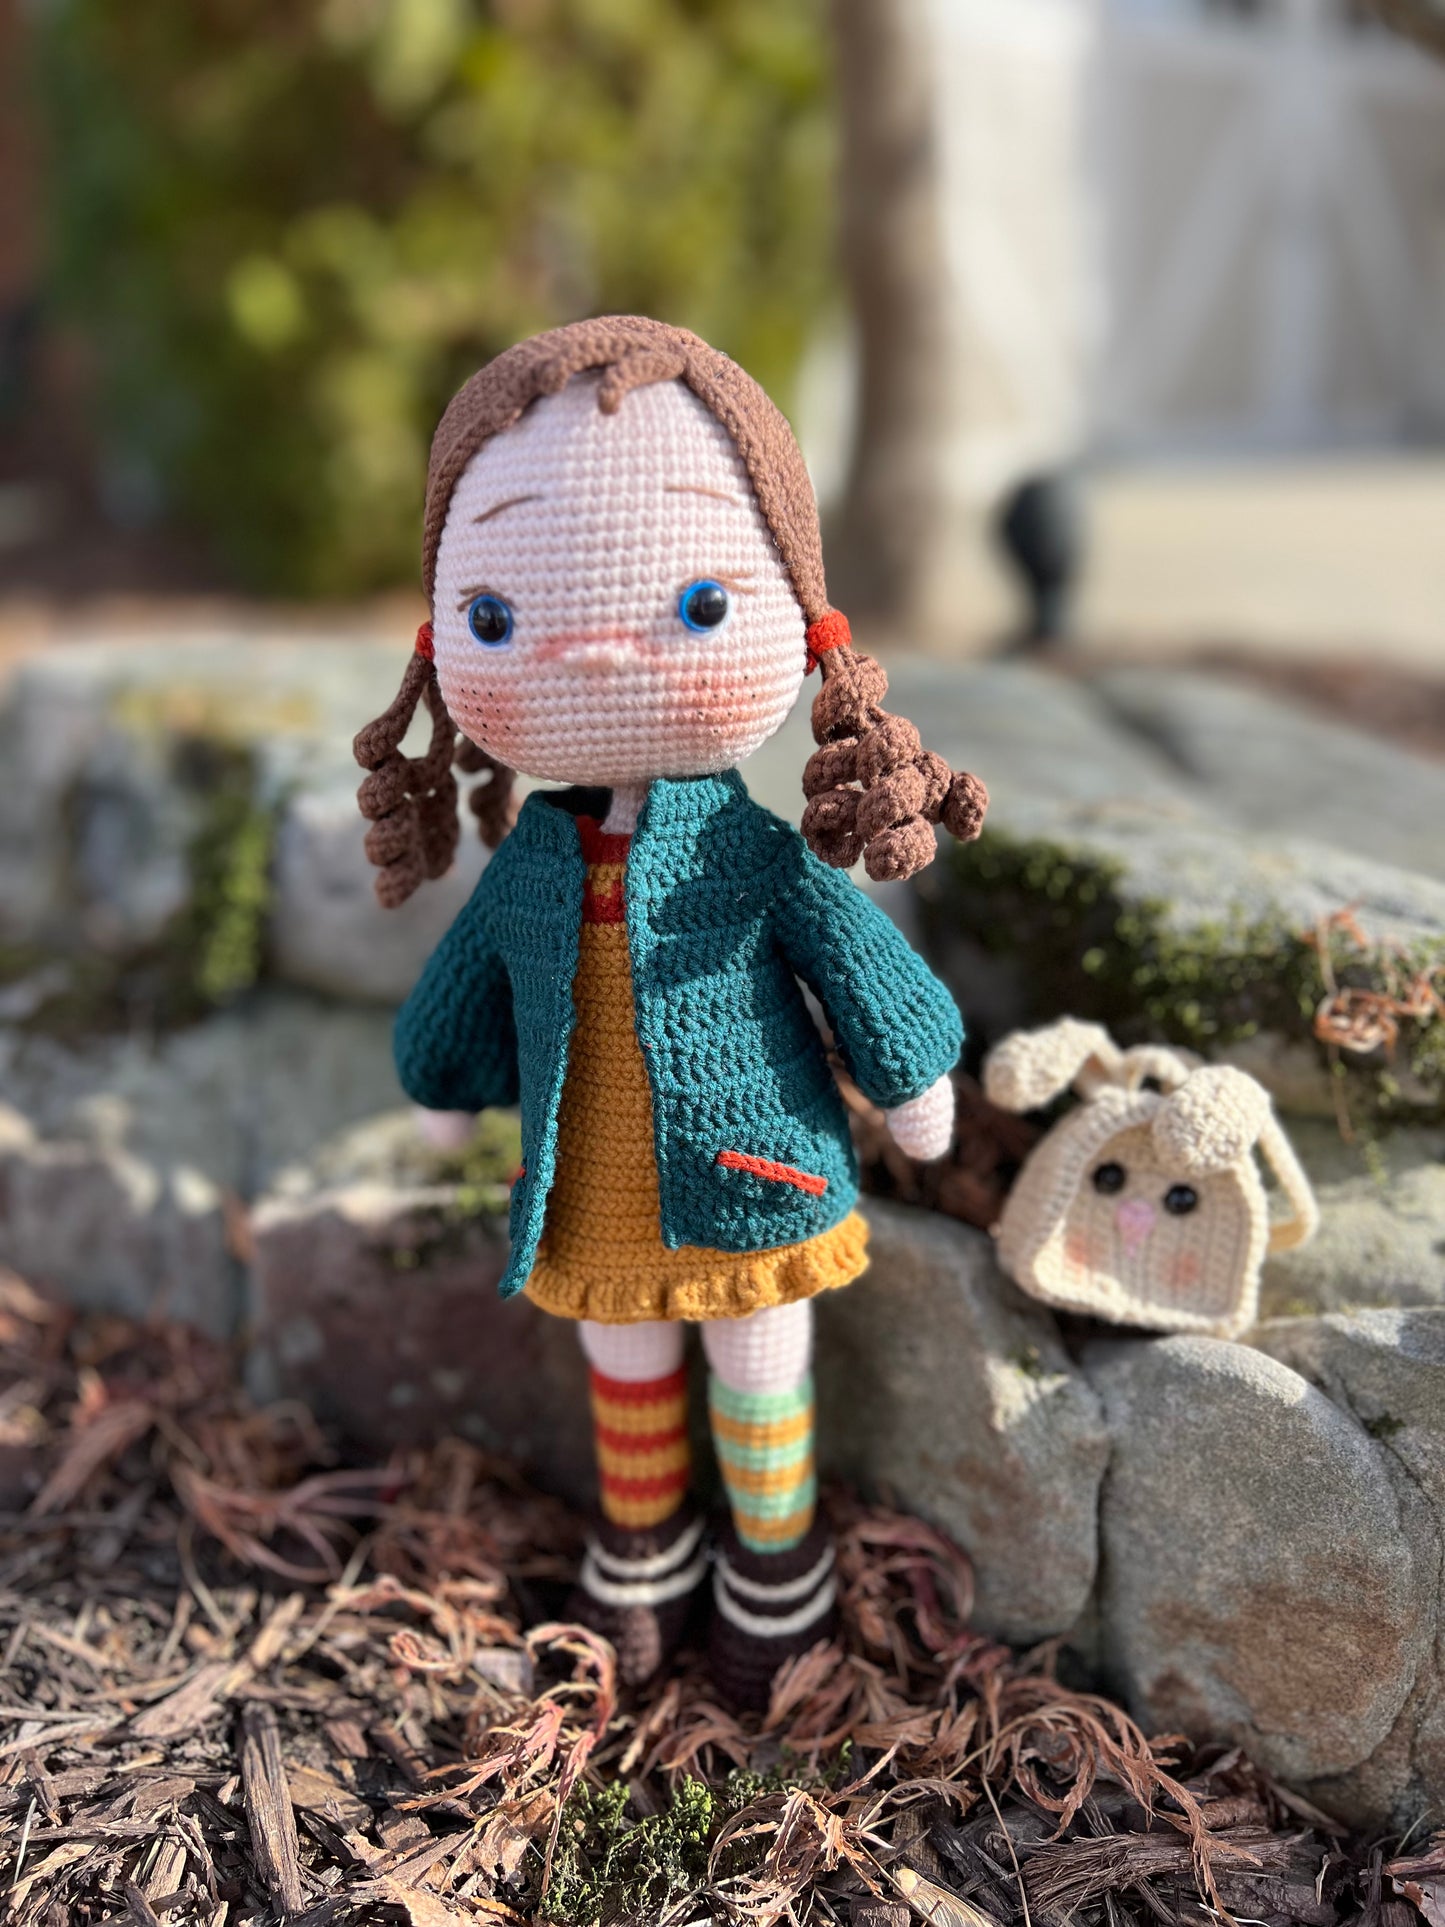 Crocheted Girl with Bunny Backpack, Readymade Amigurumi Doll, Handcrafted, Kids Gifts, Artisan Doll, Limited Edition Baby Dolls, Collectible Handmade